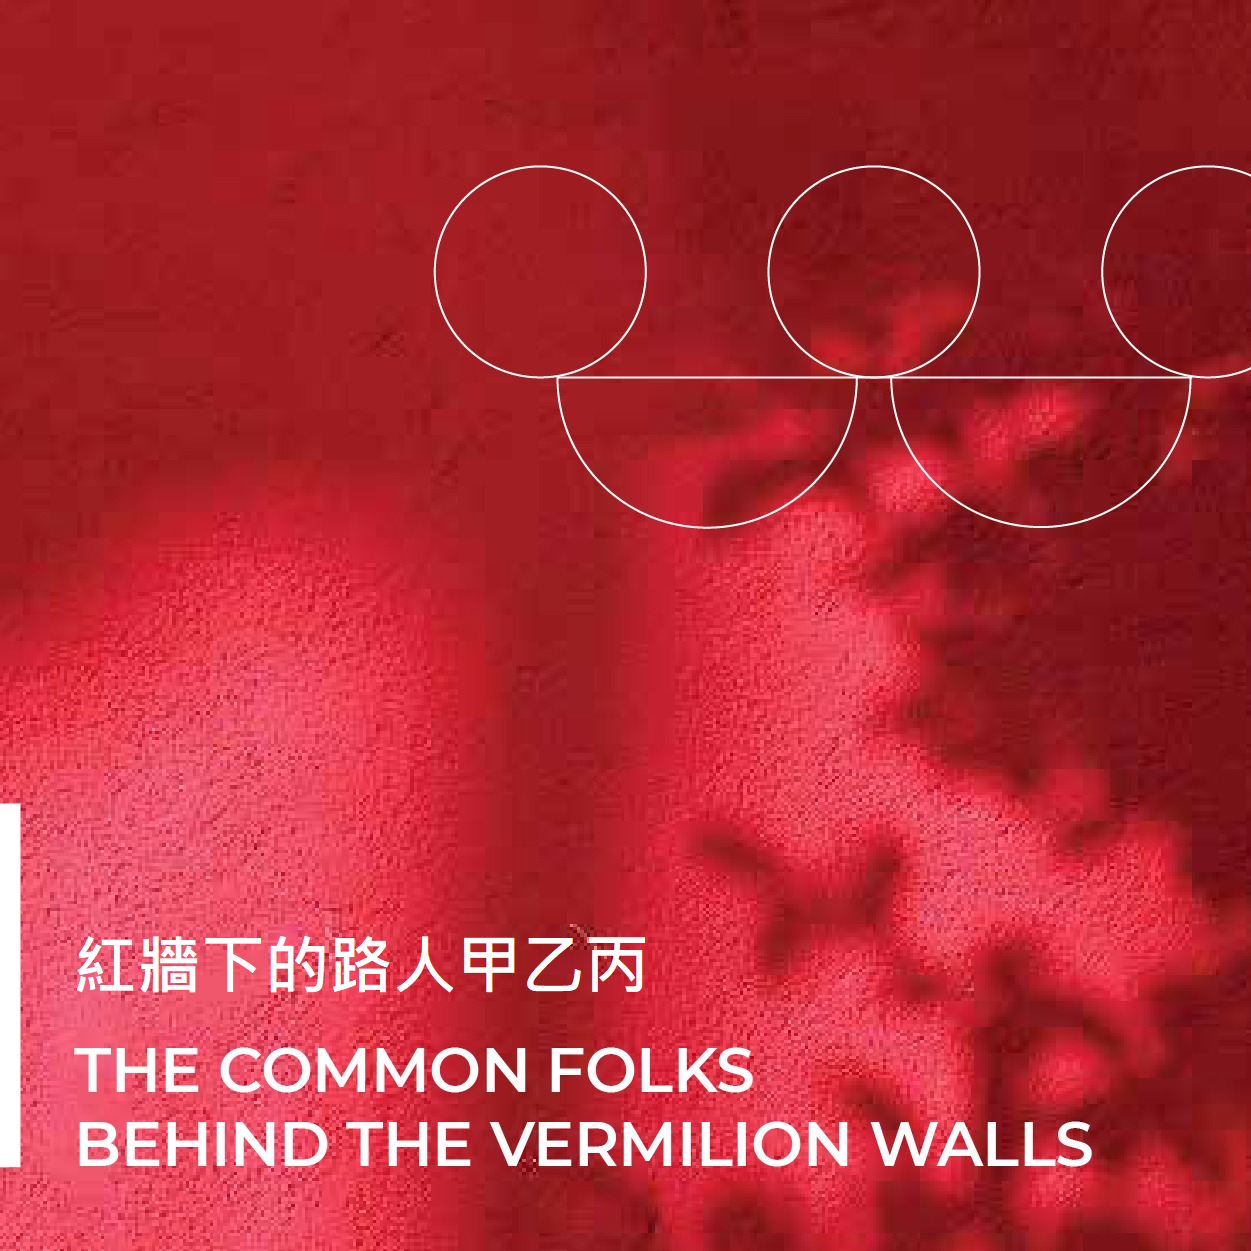 Thumbnail of "Traversing the Forbidden City – The Common Folks behind the Vermilion Walls" Online Exhibition